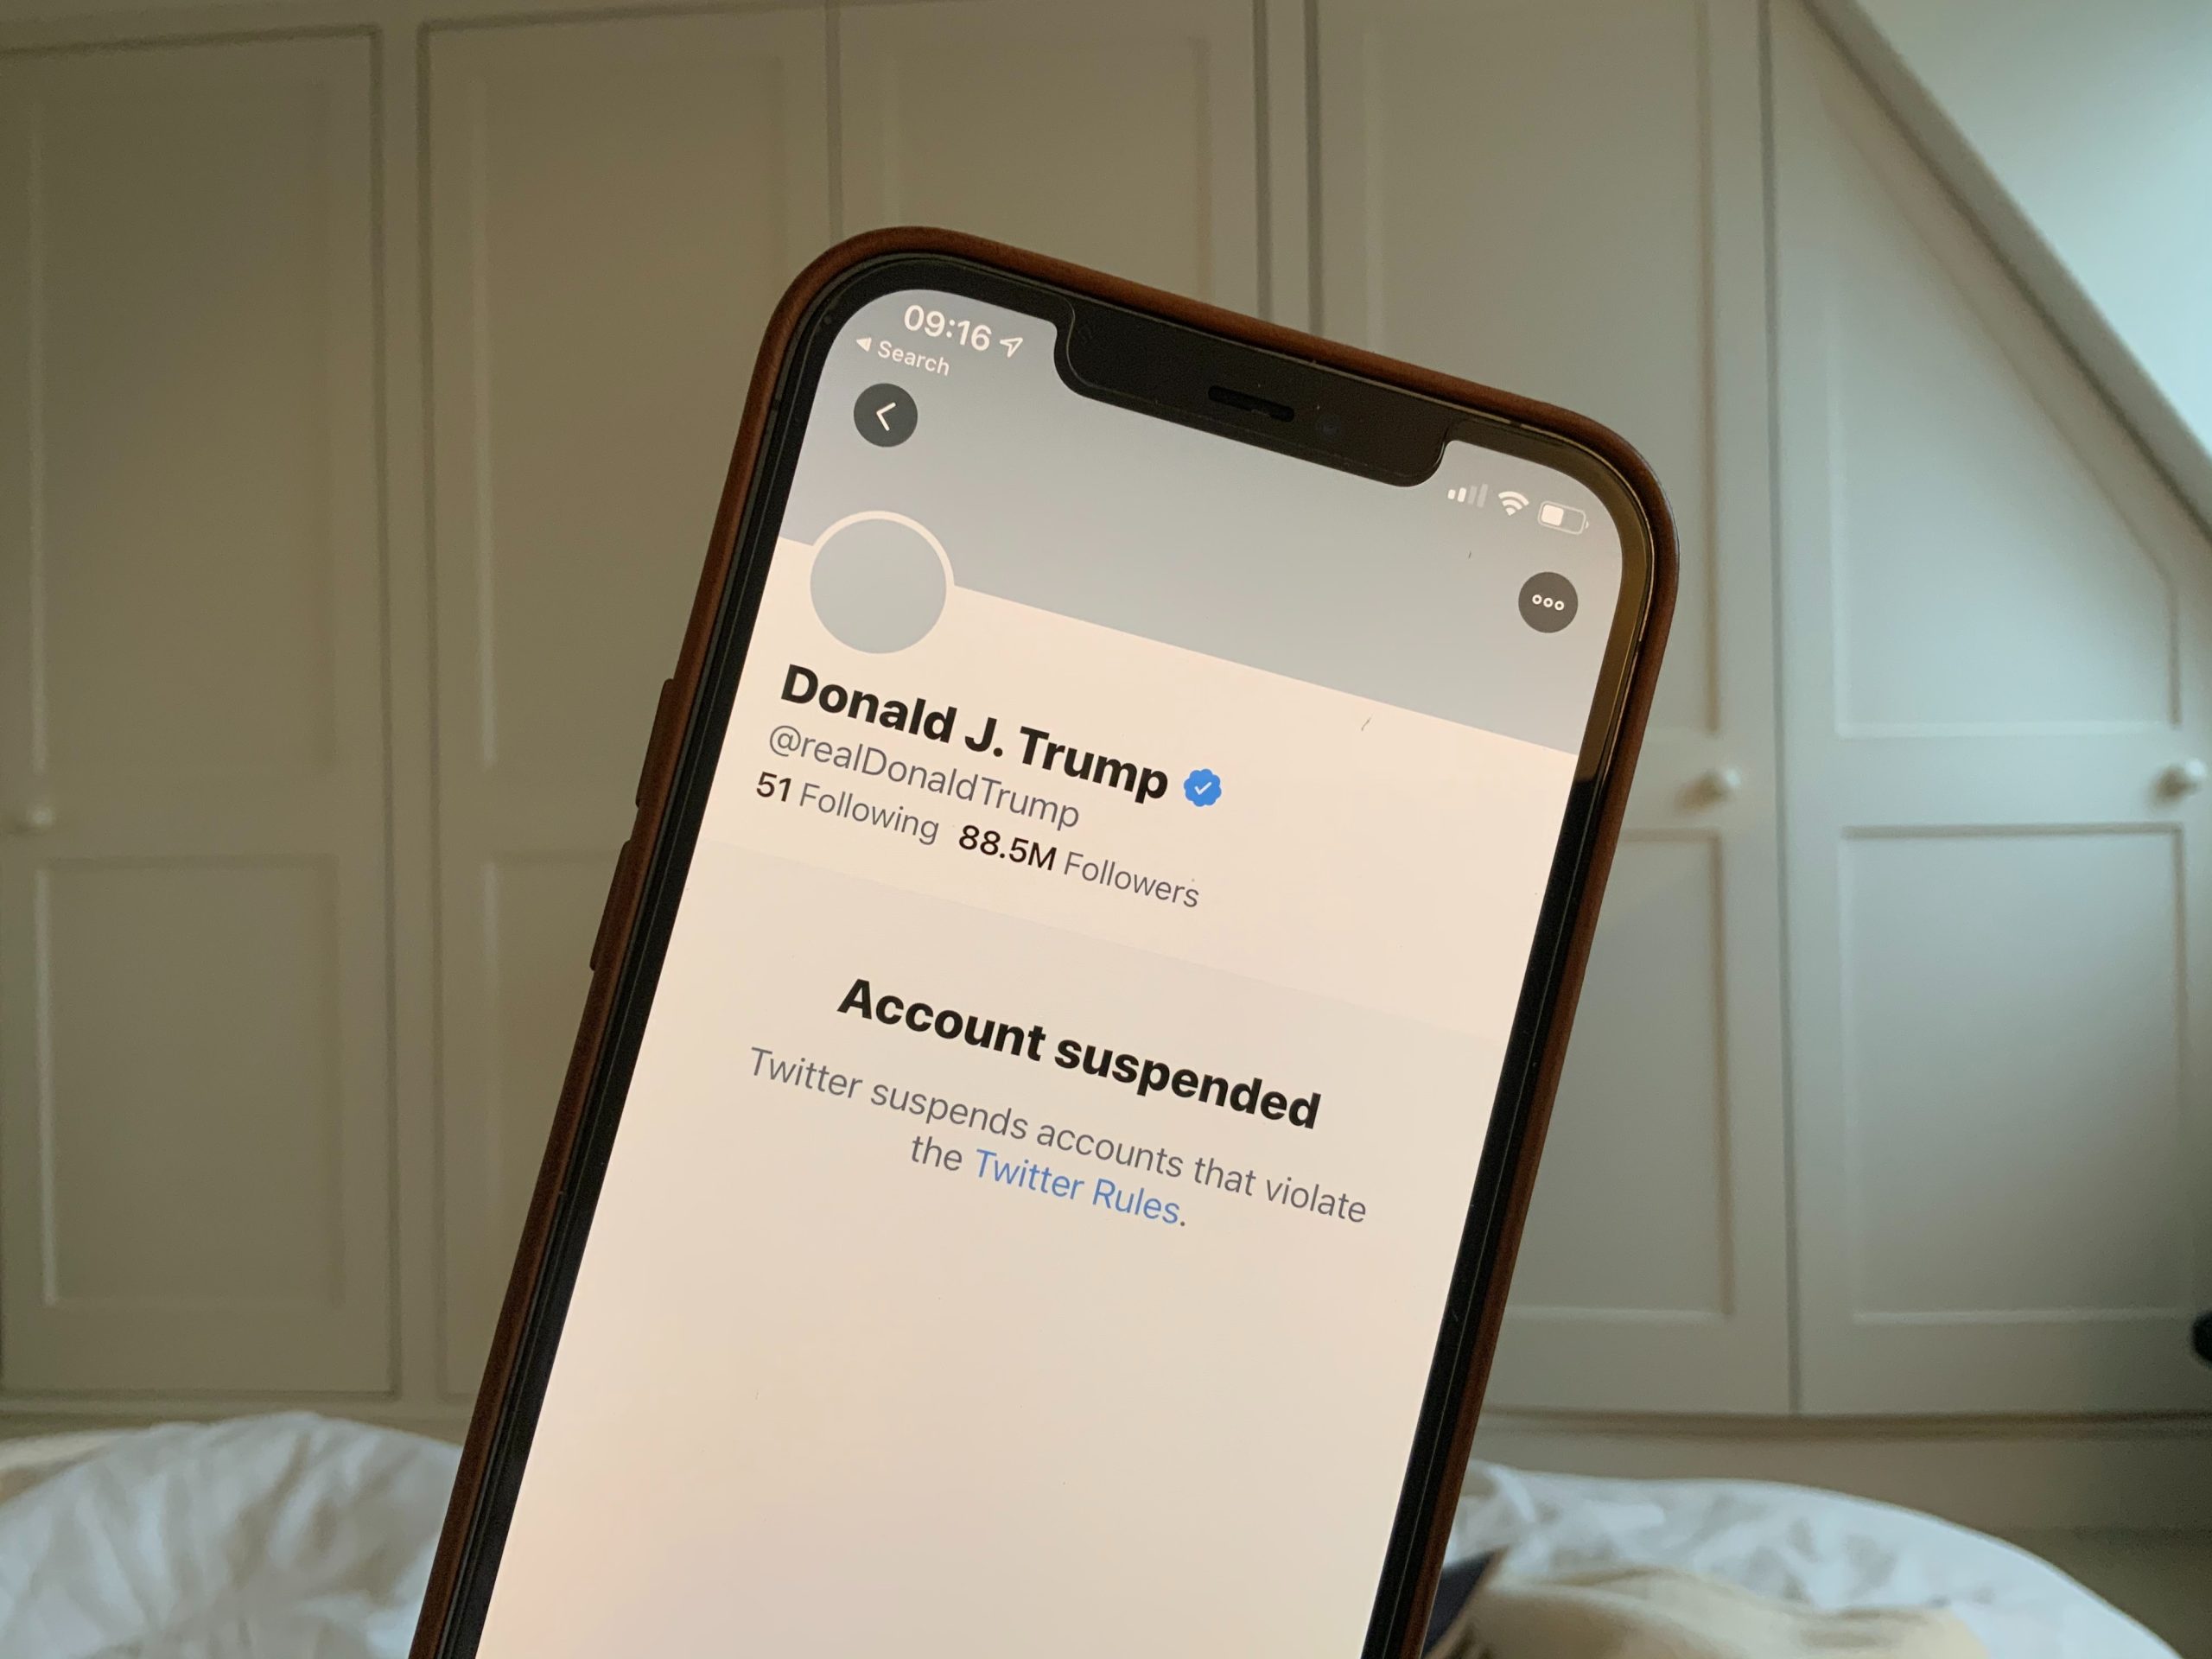 iPhone showing Trump's suspended Twitter account.